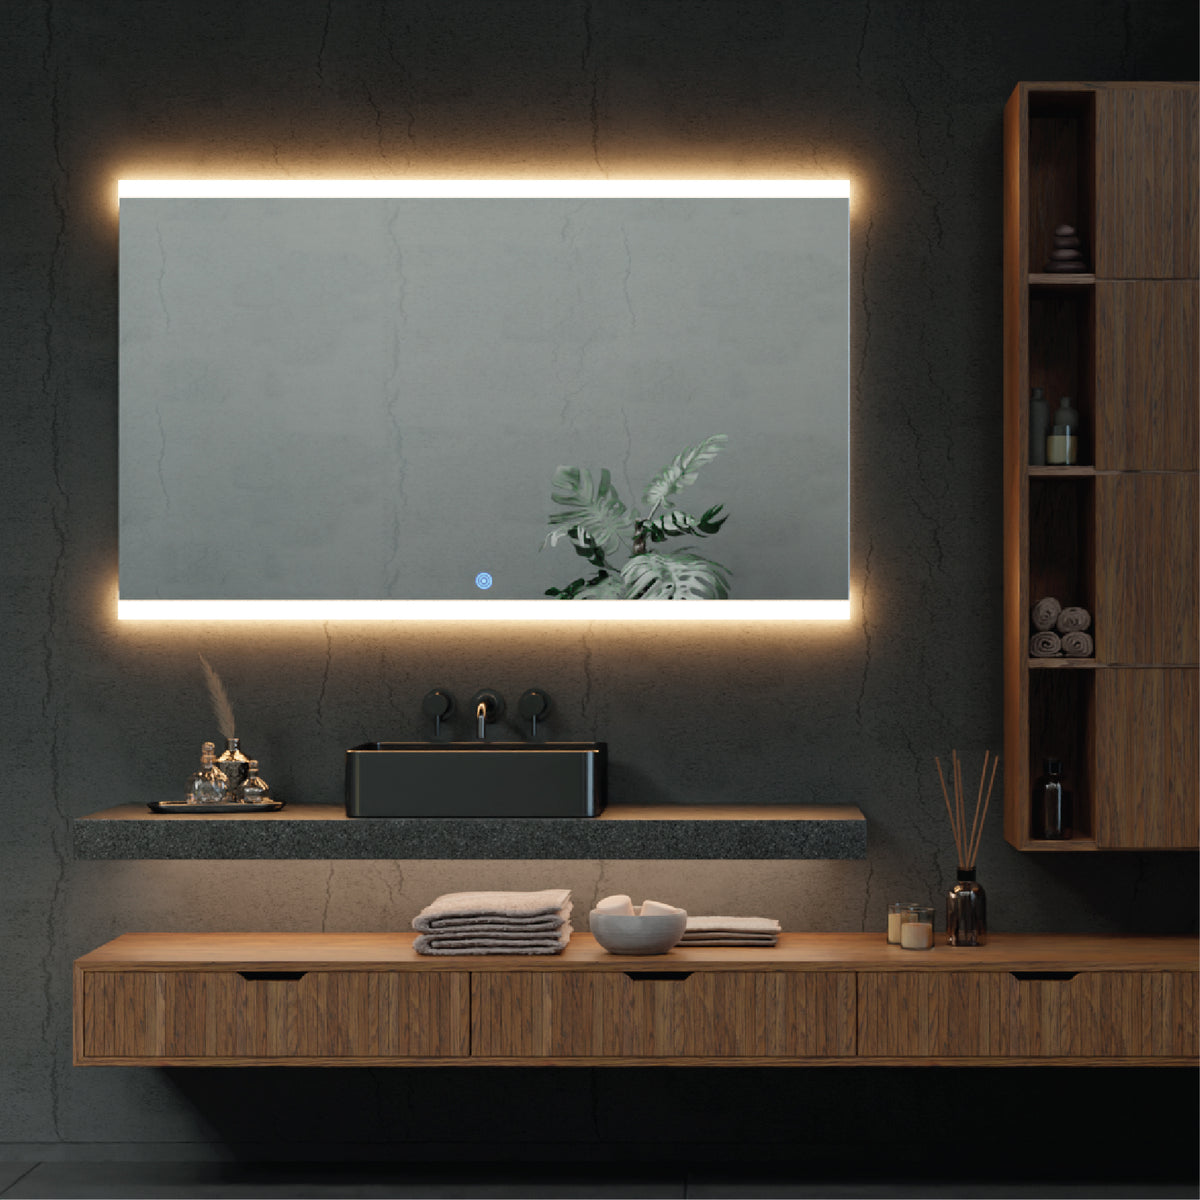 The mirror's switch control offers a straightforward way to manage lighting preferences, adding a layer of convenience to your routine.